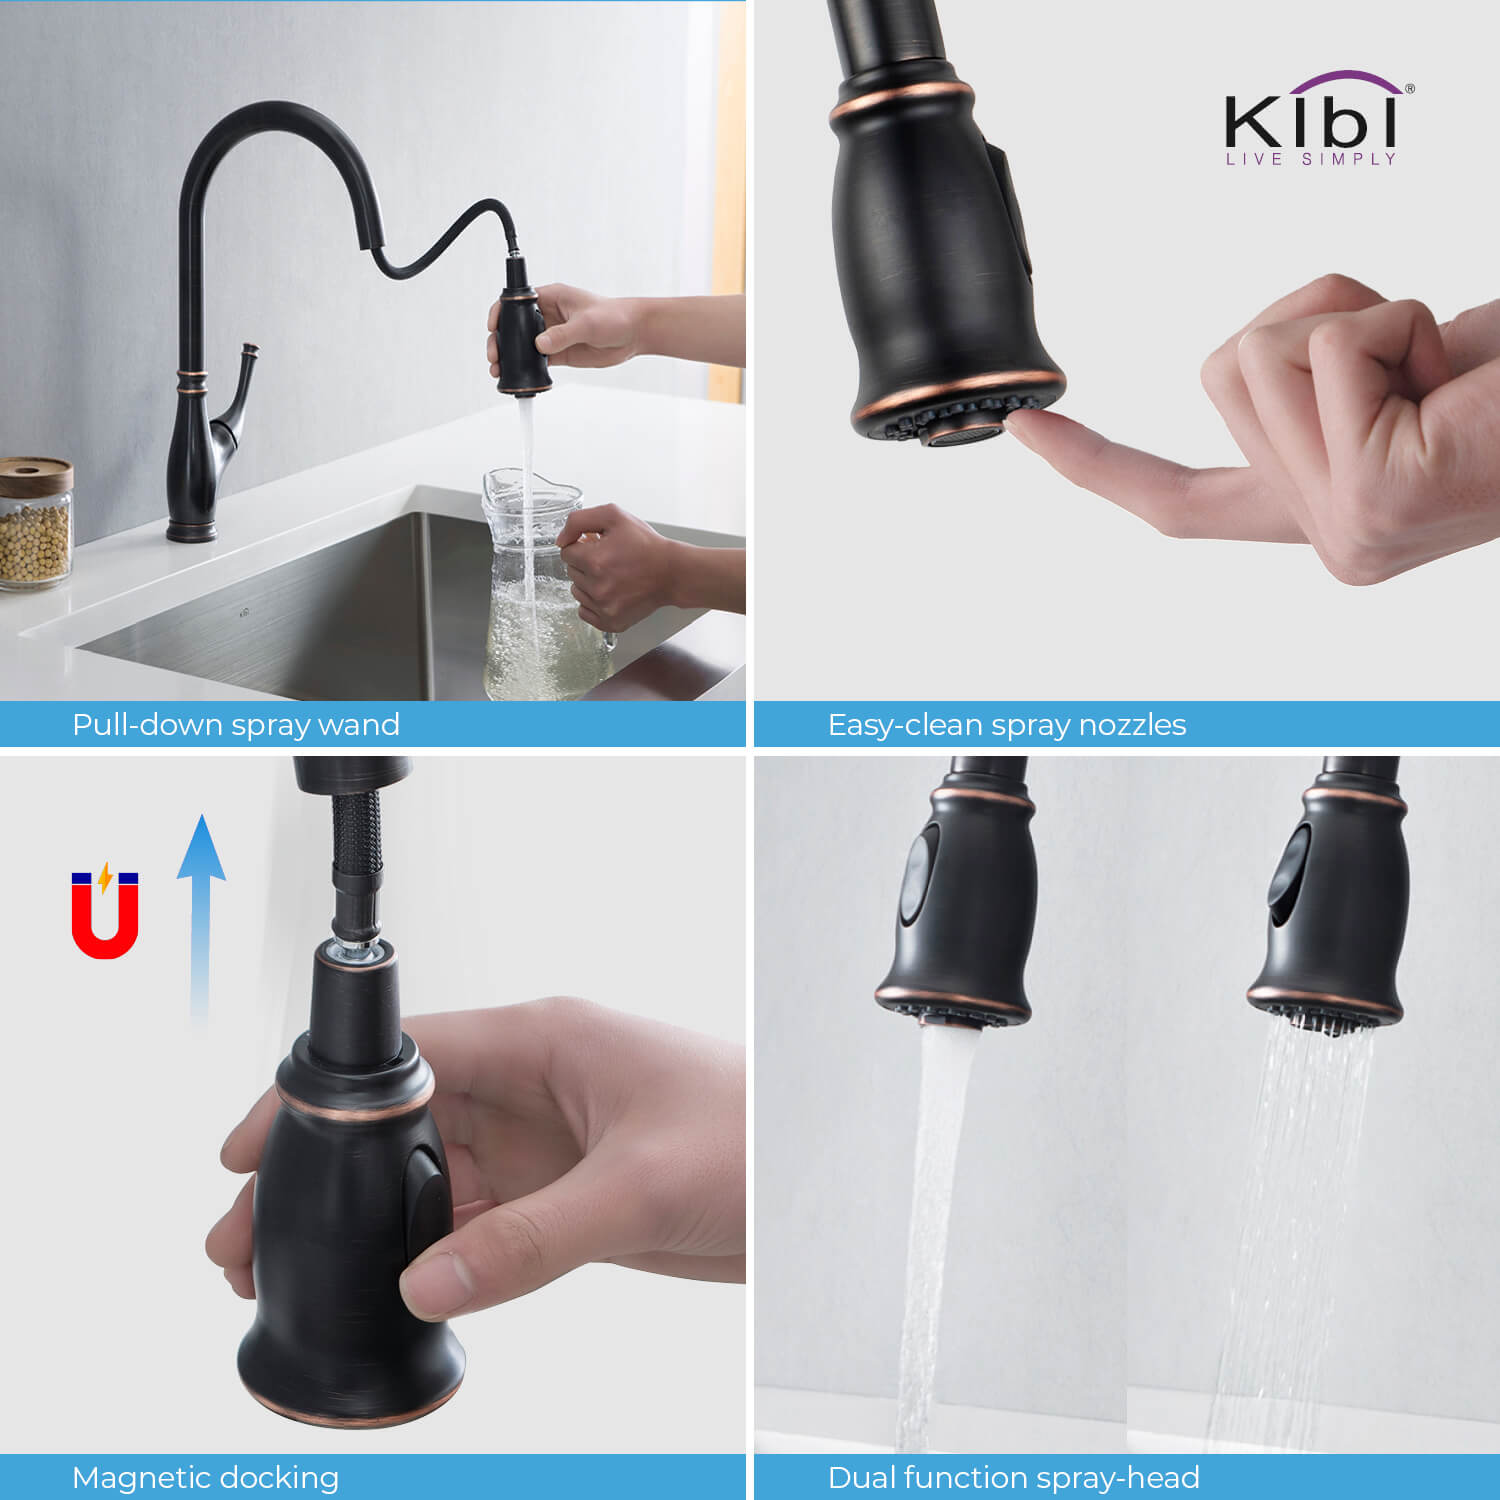 Kibi Summit Single Handle High Arc Pull Down Kitchen Faucet With Soap Dispenser in Oil Rubbed Bronze Finish